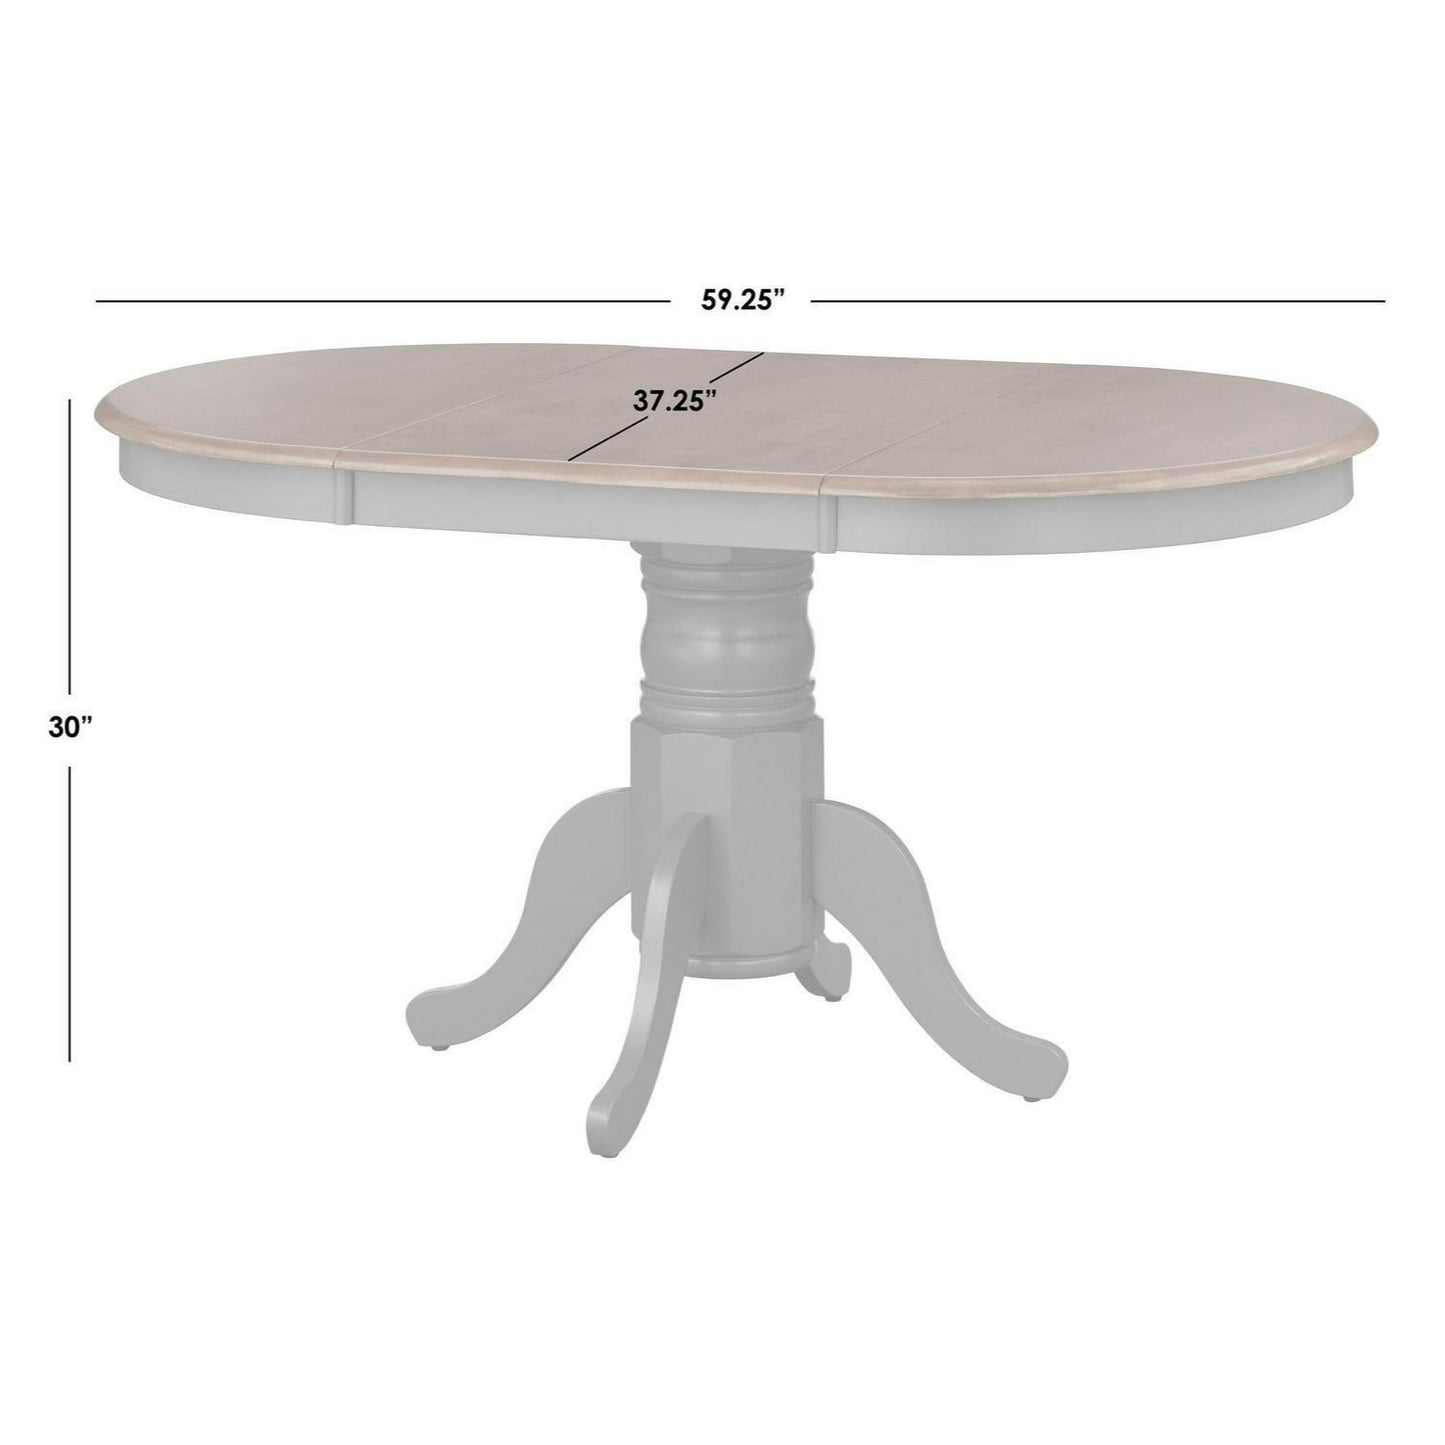 Country Style Pedestal Table: Solid Wood w/ 22in Leaf - White Finish, Nat Top